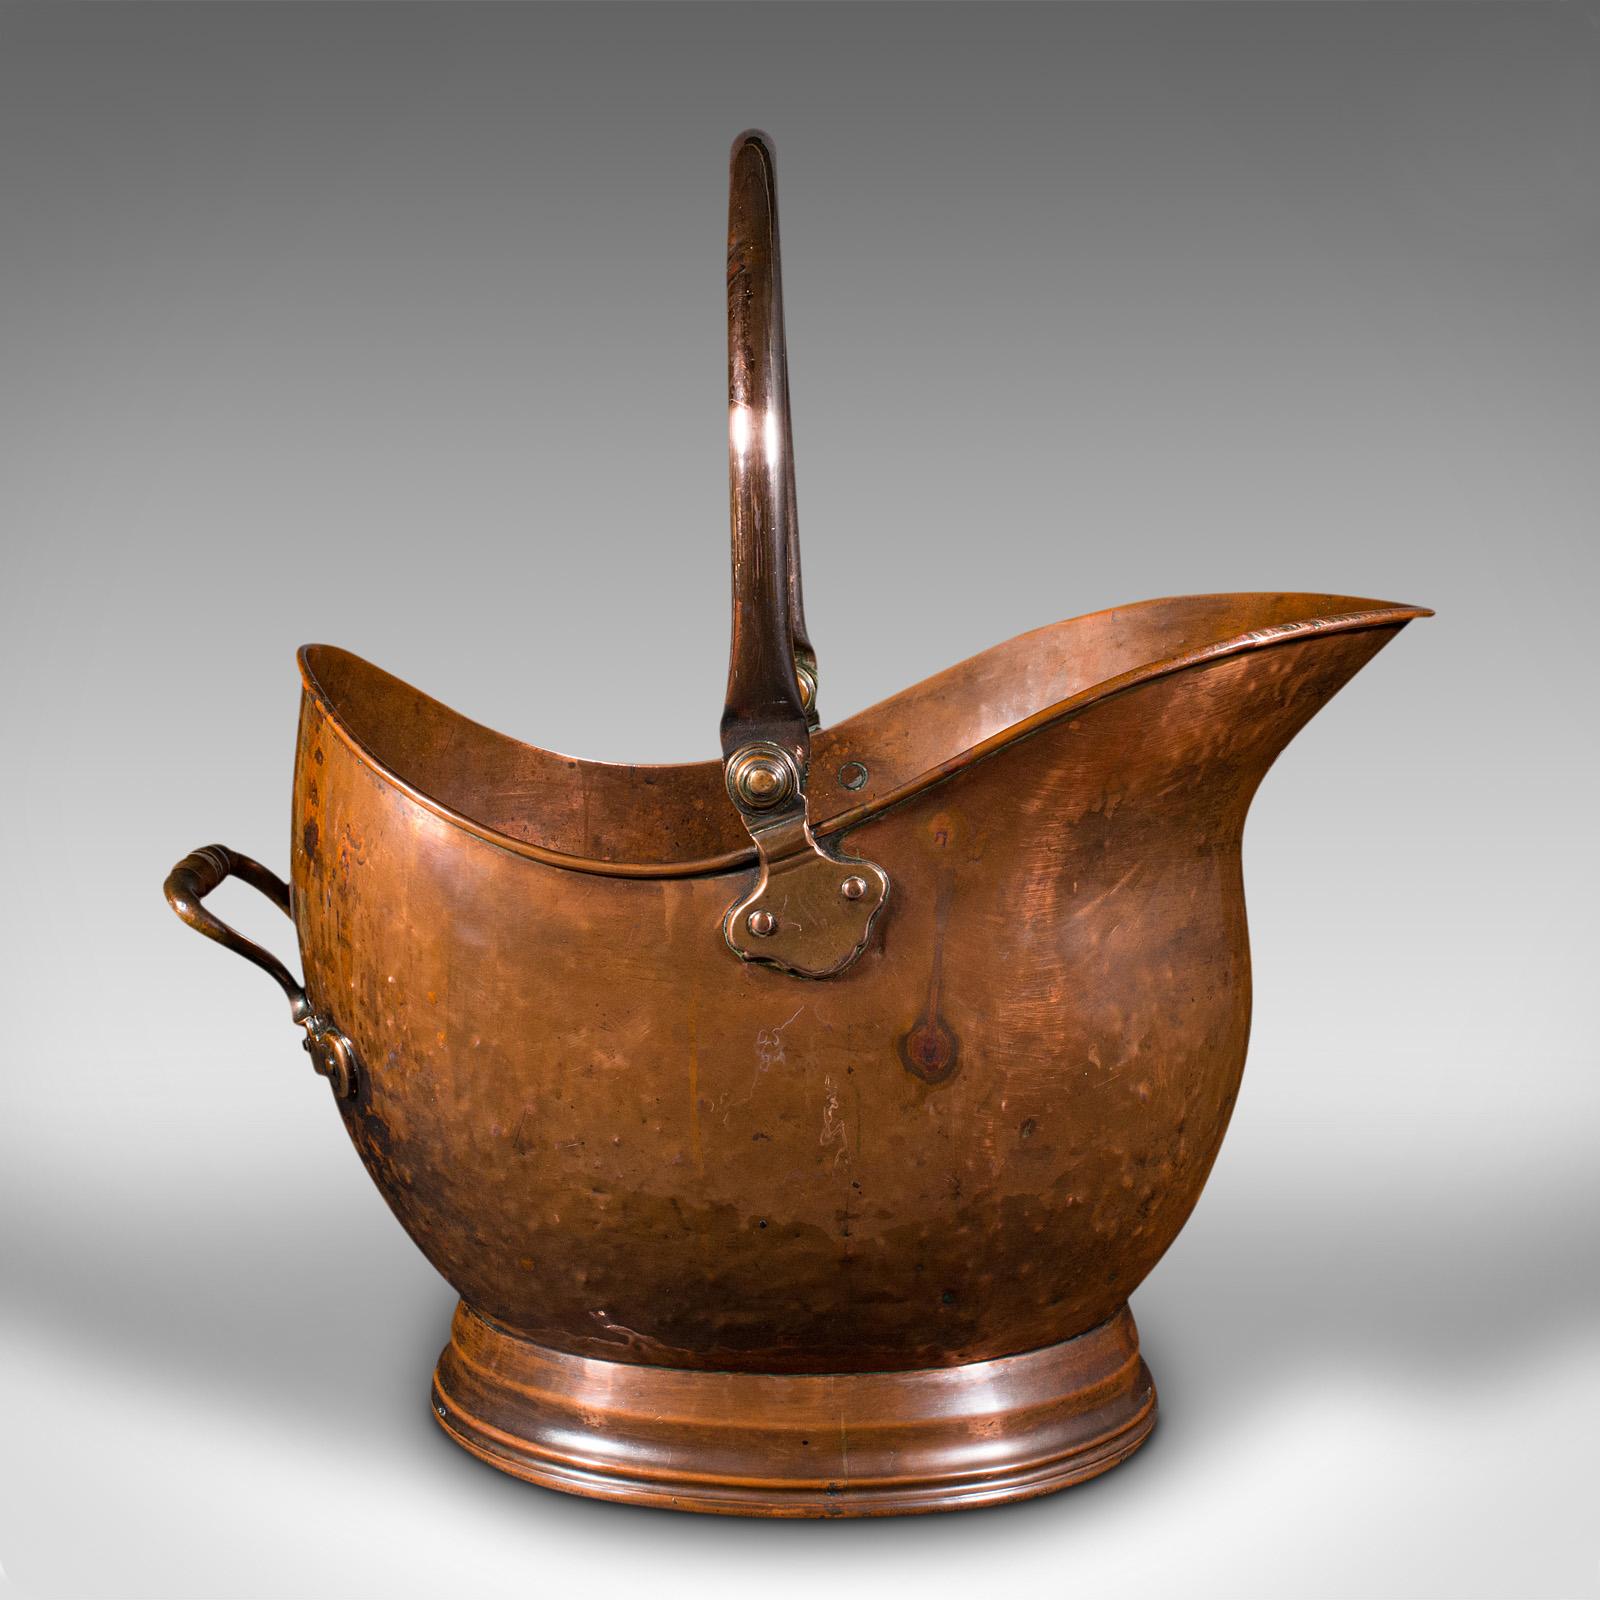 This is an antique helmet scuttle. An English, copper coal bucket or fireside bin, dating to the early Victorian period, circa 1850.

Delightful helmet shaped scuttle with wonderful warm hues
Displays a desirable aged patina and in good original